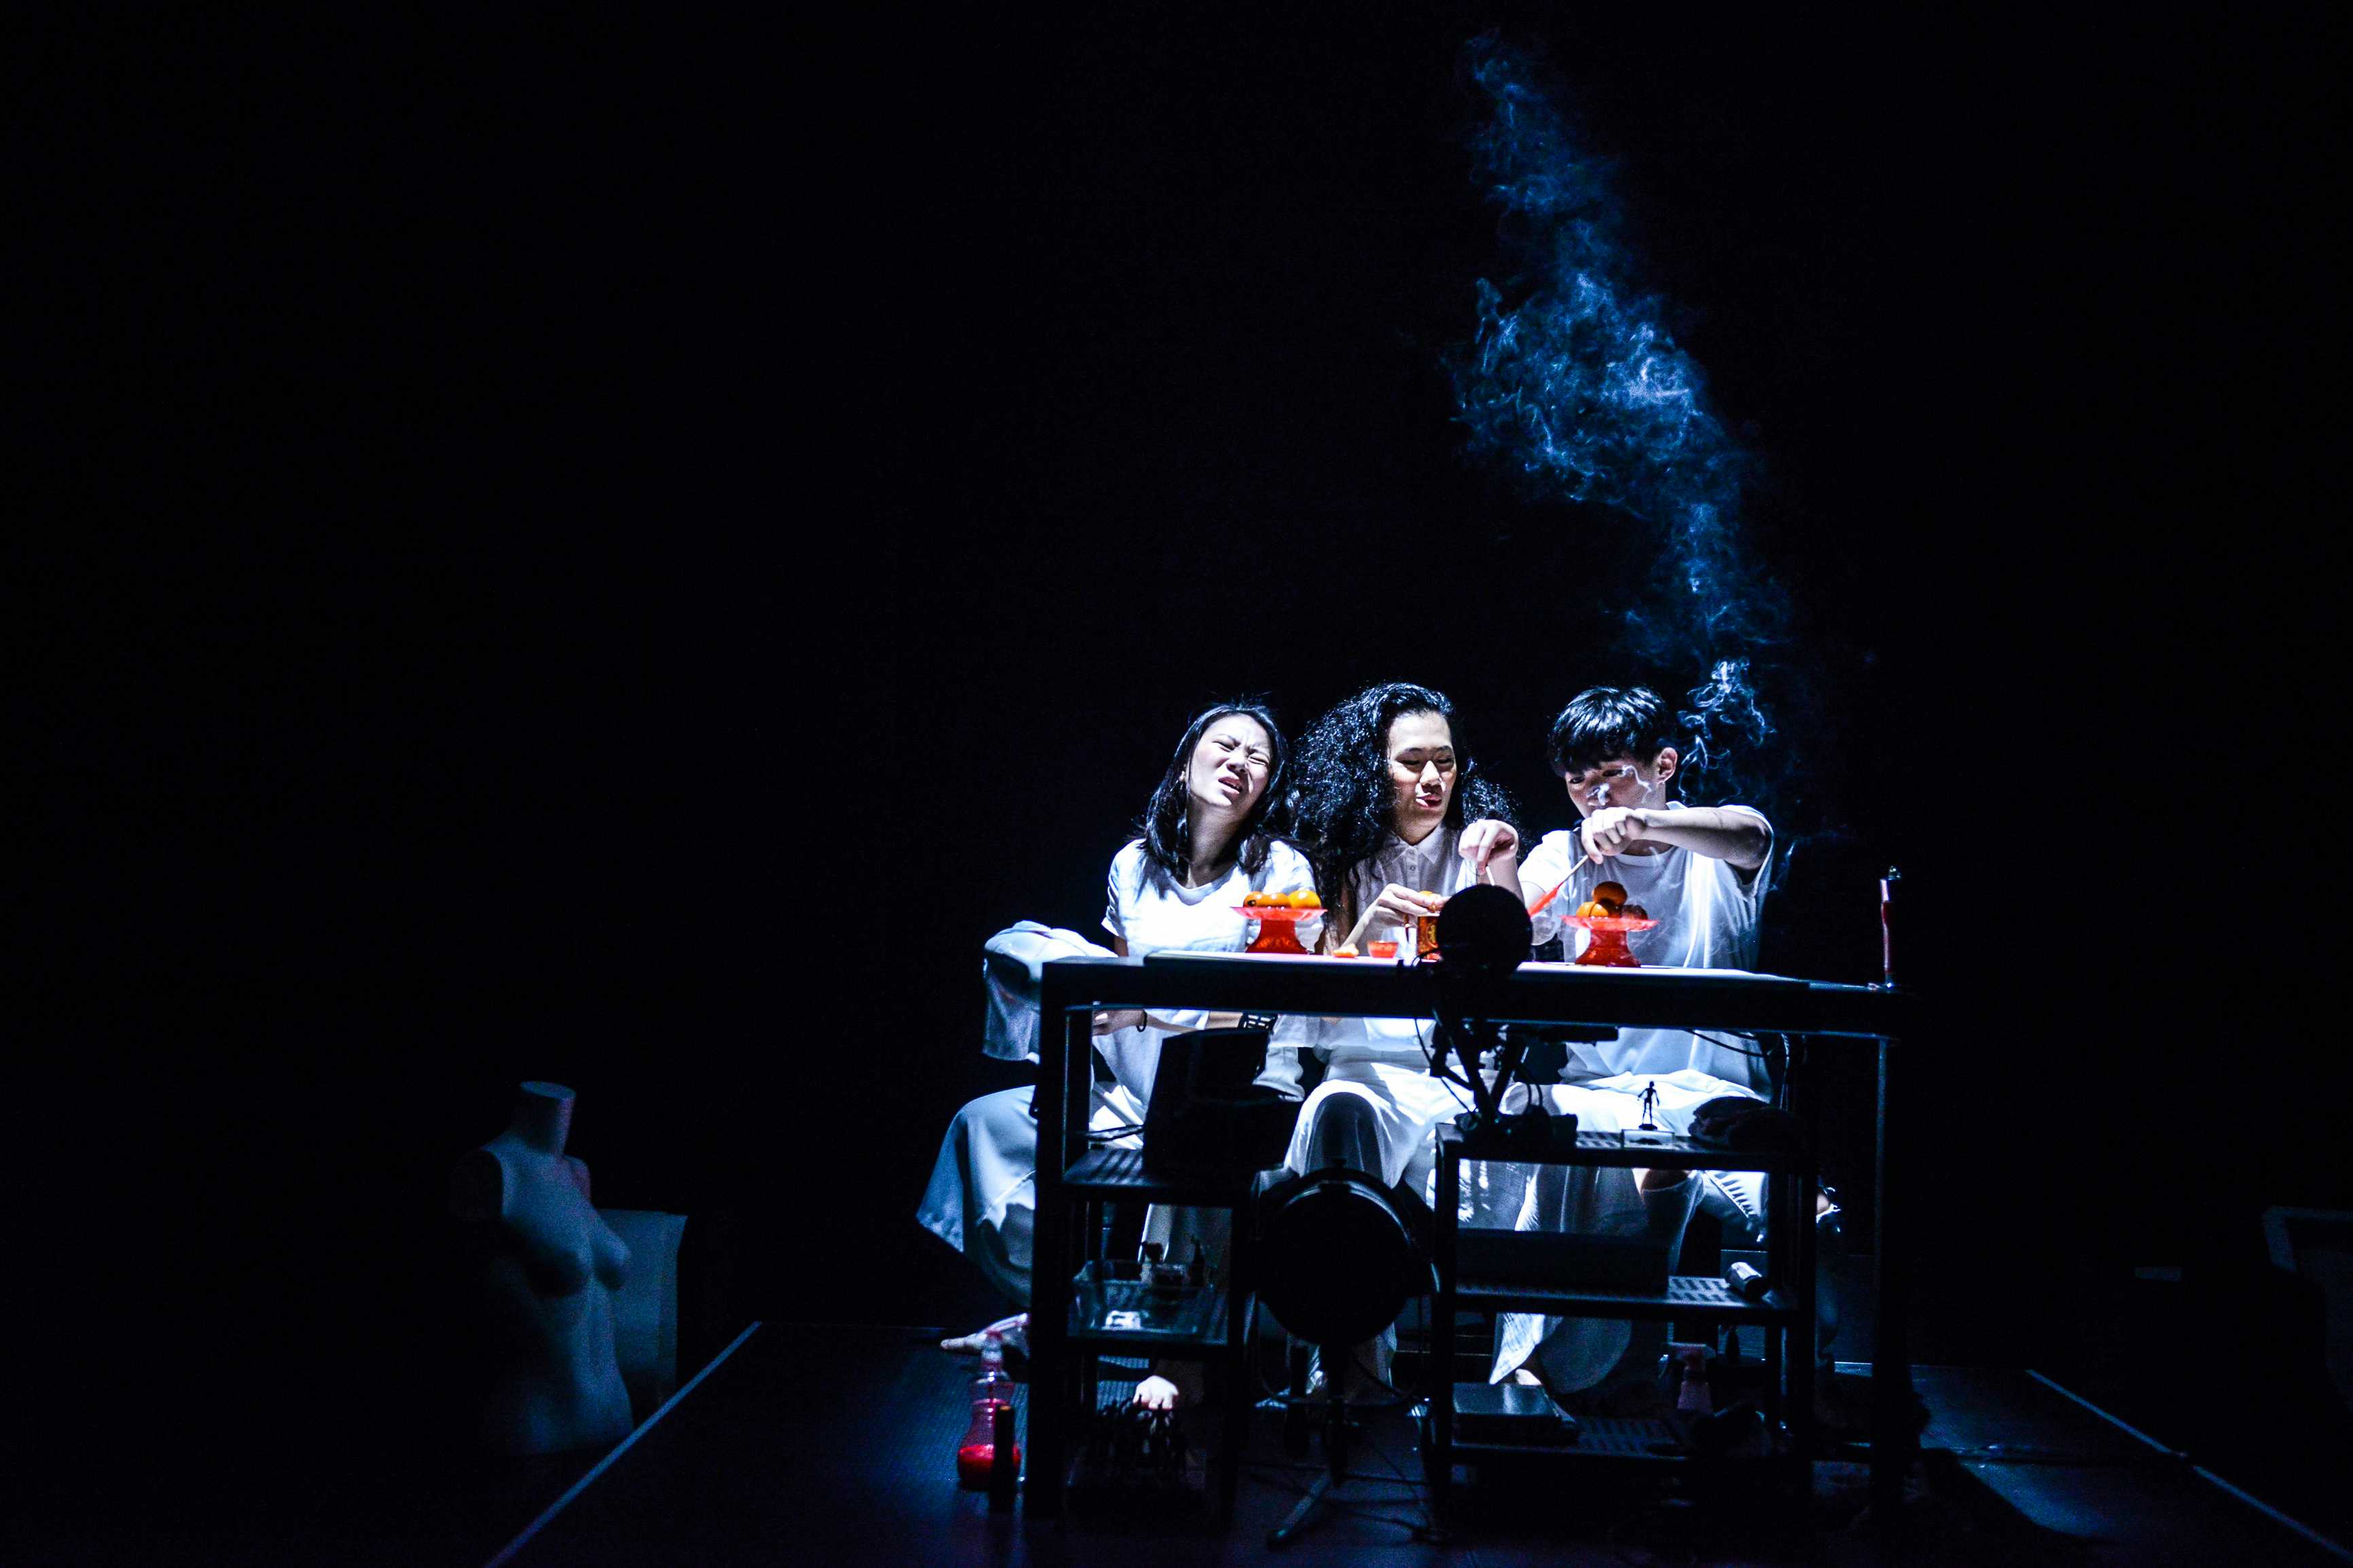 The Furies Variations, Rooftop Productions Theatre Hong Kong 2018 | Featuring: Chou Henick, Michelle Li, Wong On Ting | Tagged as: Show, The Furies Variations | Photo: Fung Wai Sun |  (Rooftop Productions • Hong Kong Theatre Company)  | Rooftop Productions • Hong Kong Theatre Company